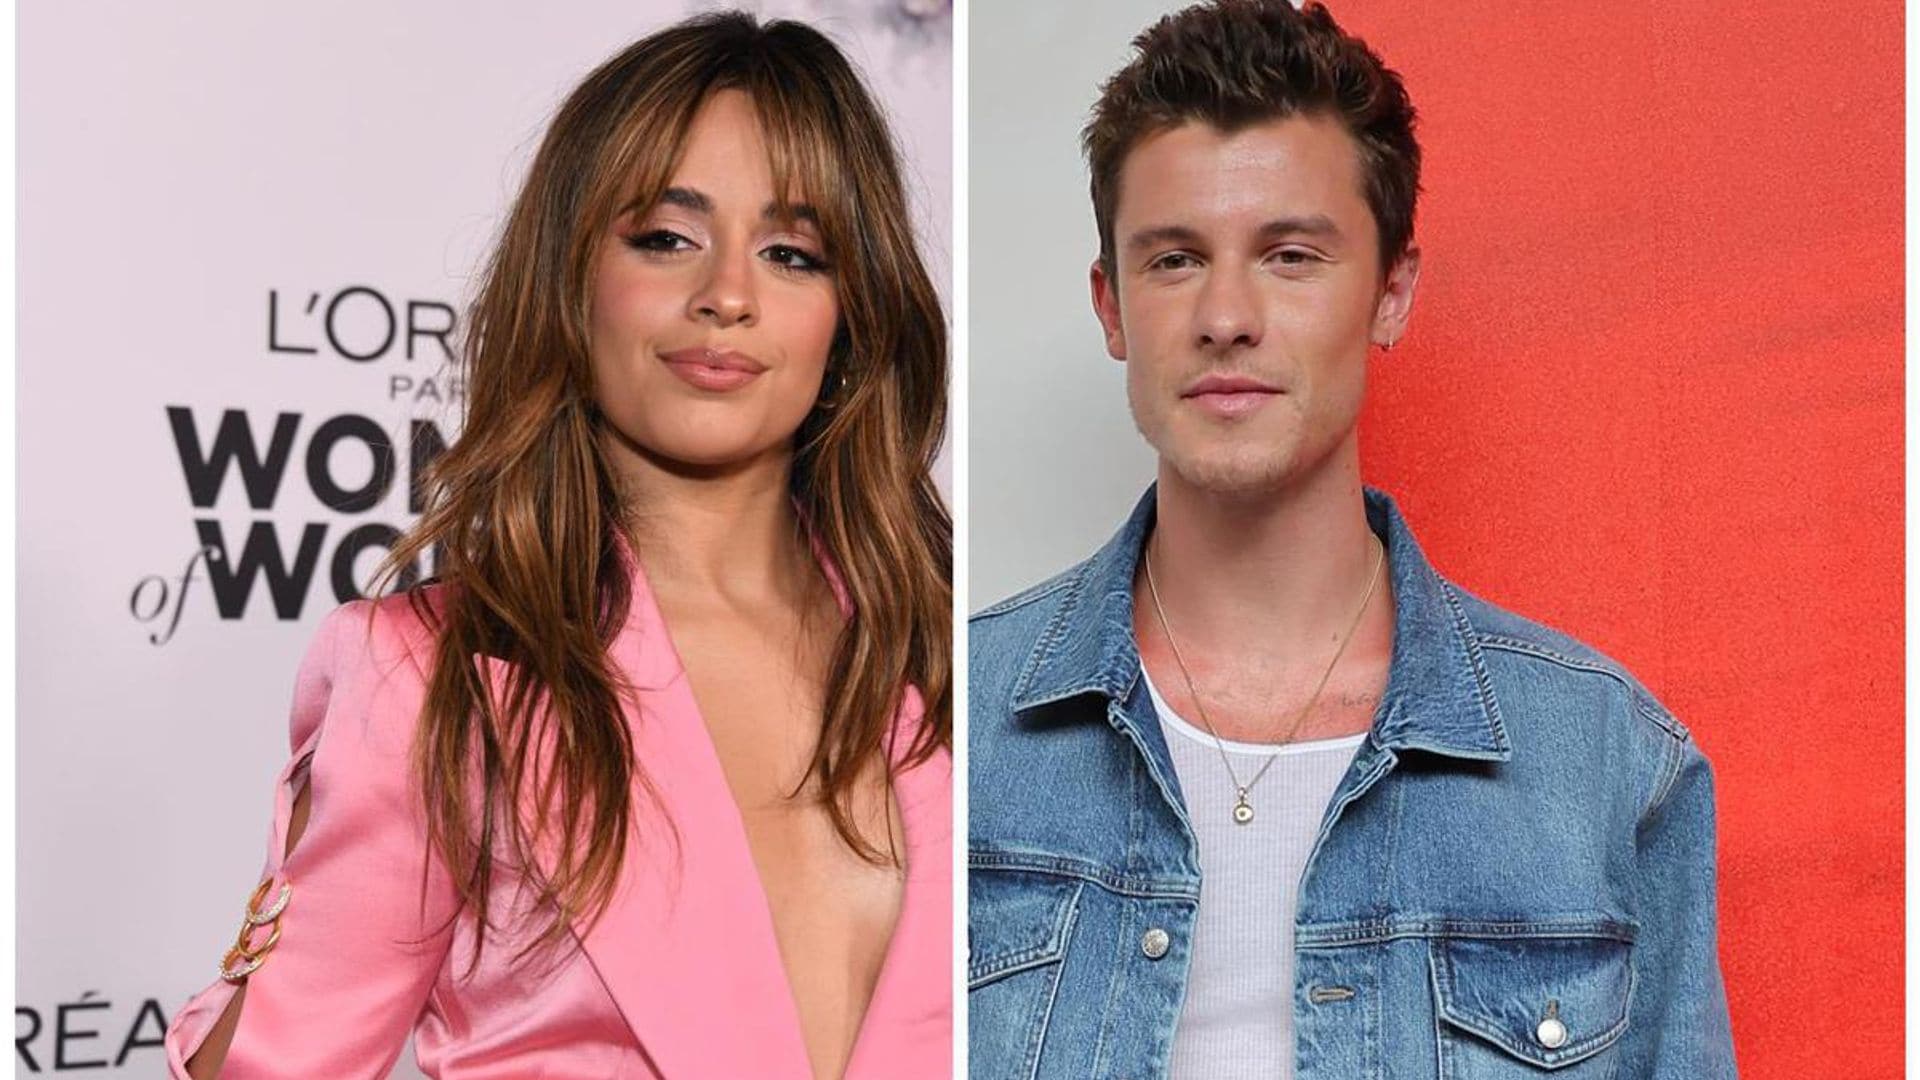 Camila Cabello ‘decided to end things’ with Shawn Mendes after brief romance: Report